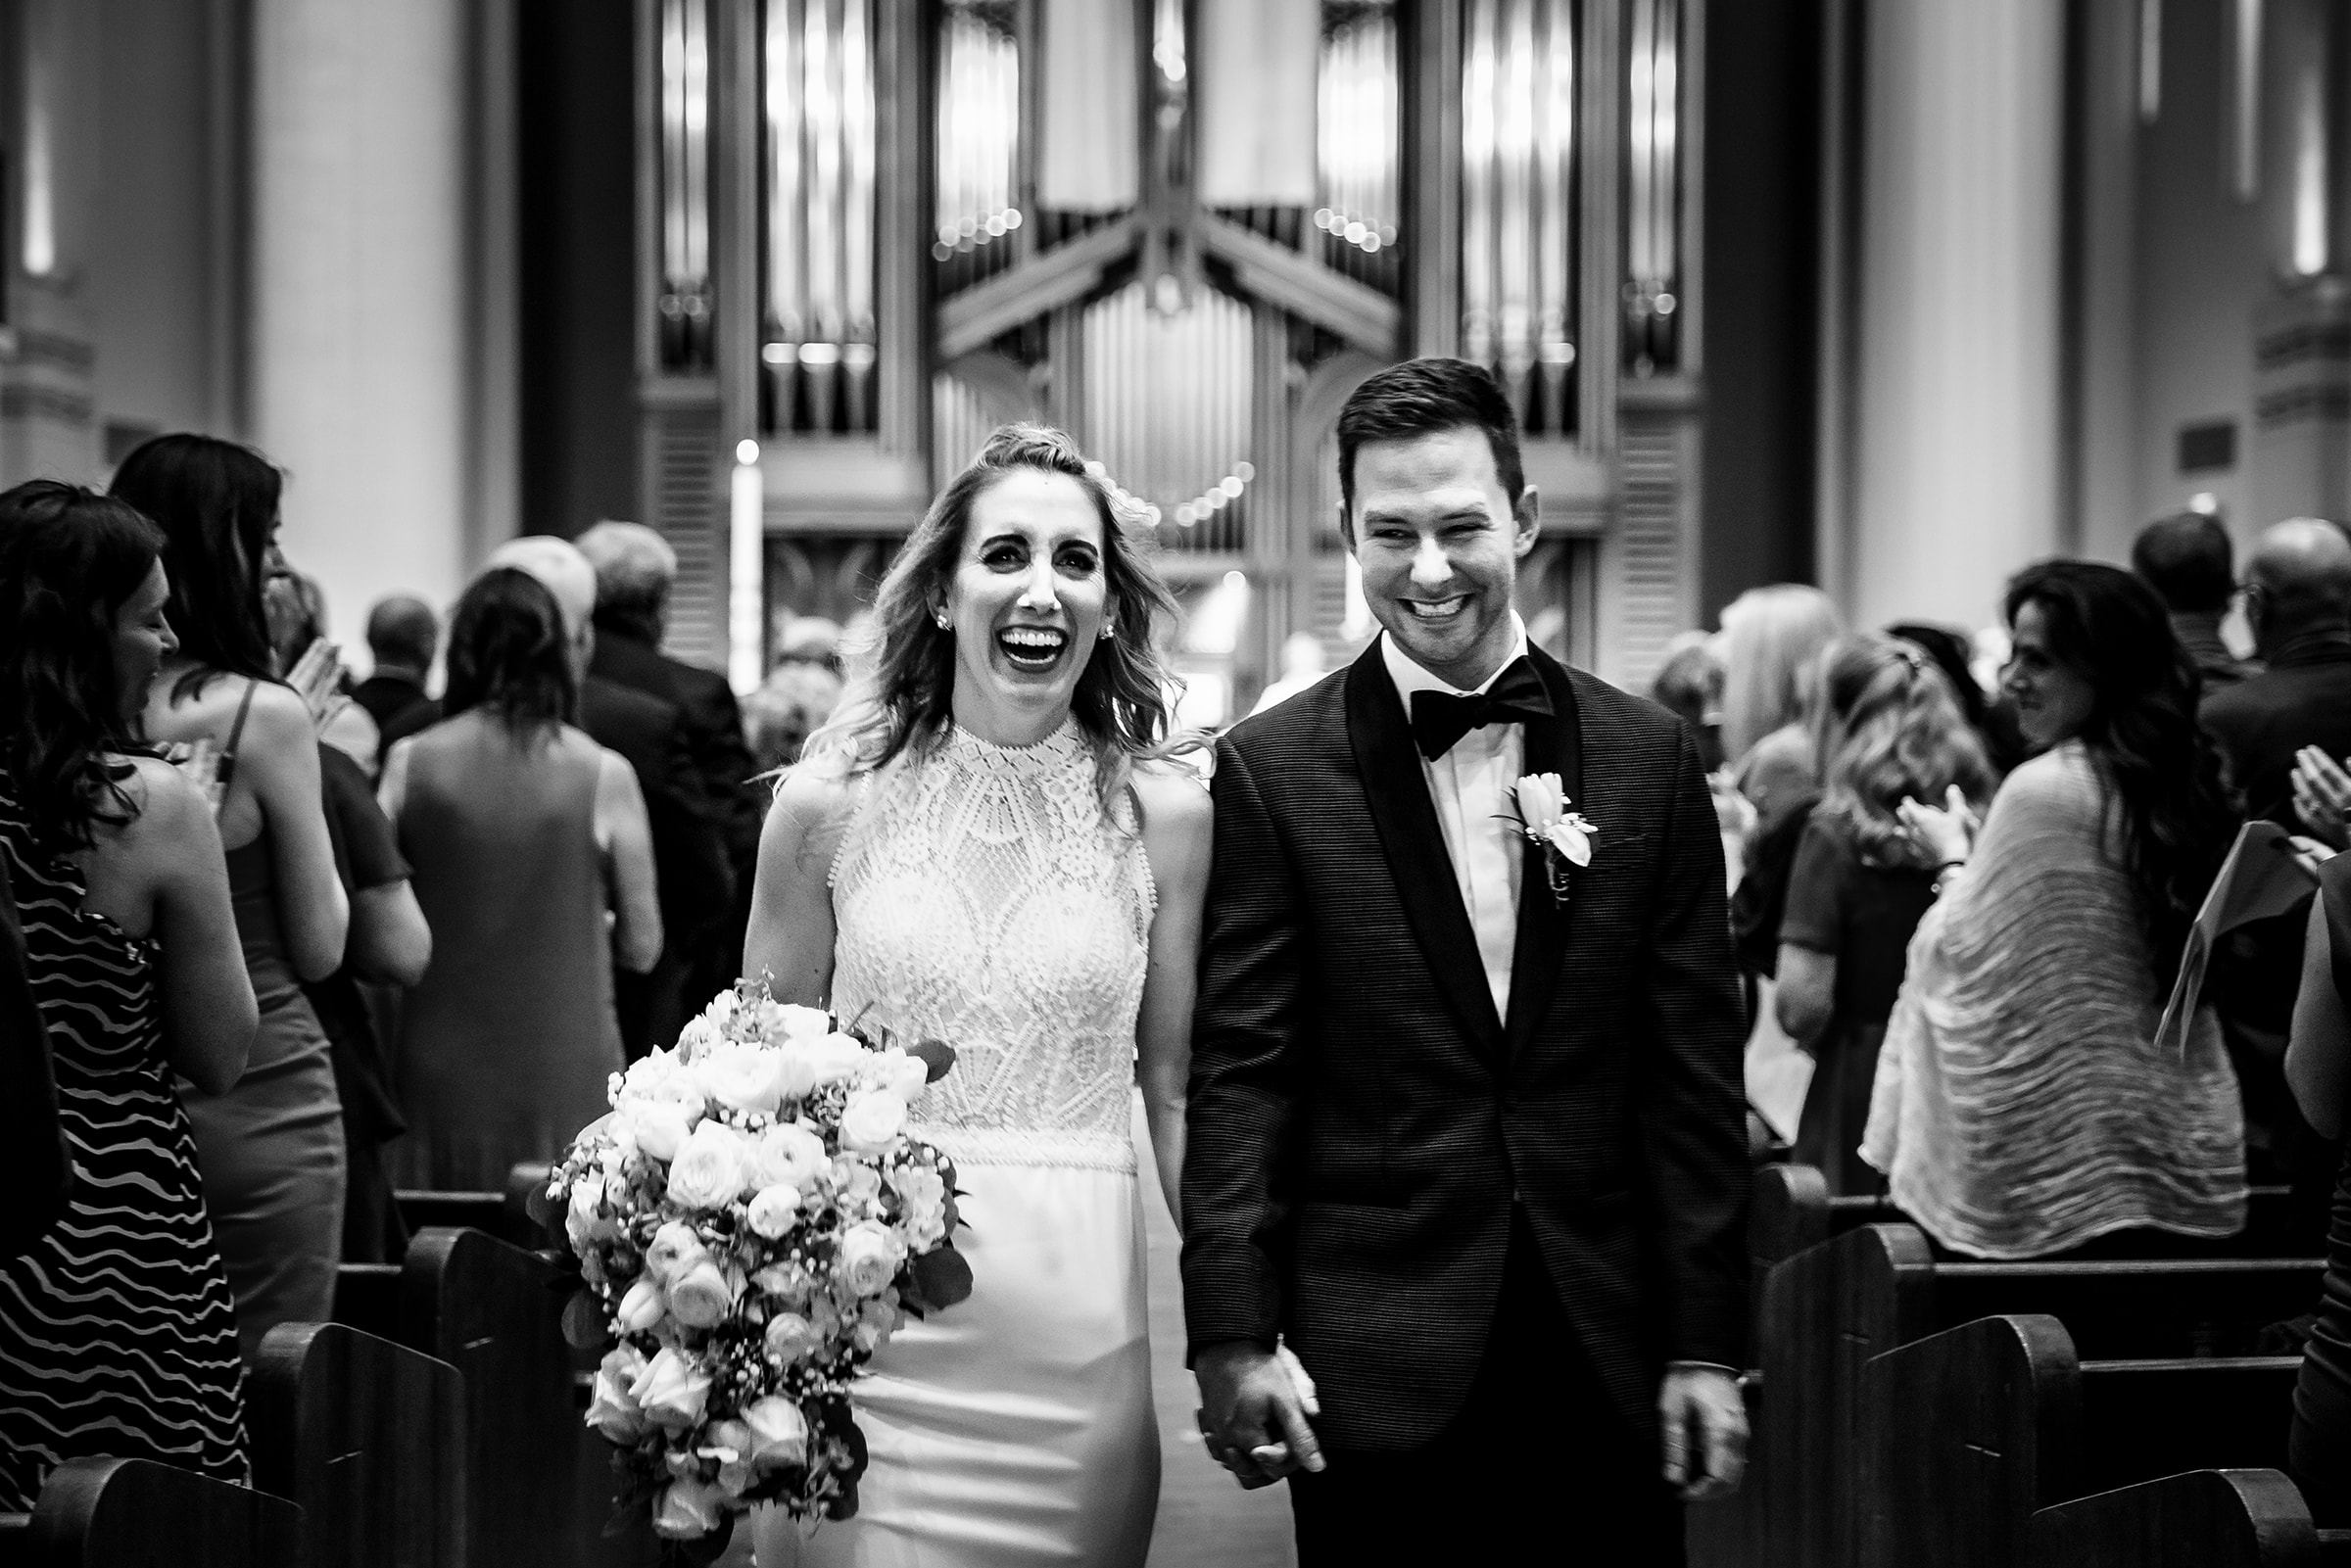 Newly married wedding couple walk down the aisle after their church ceremony in Cincinnati, OH